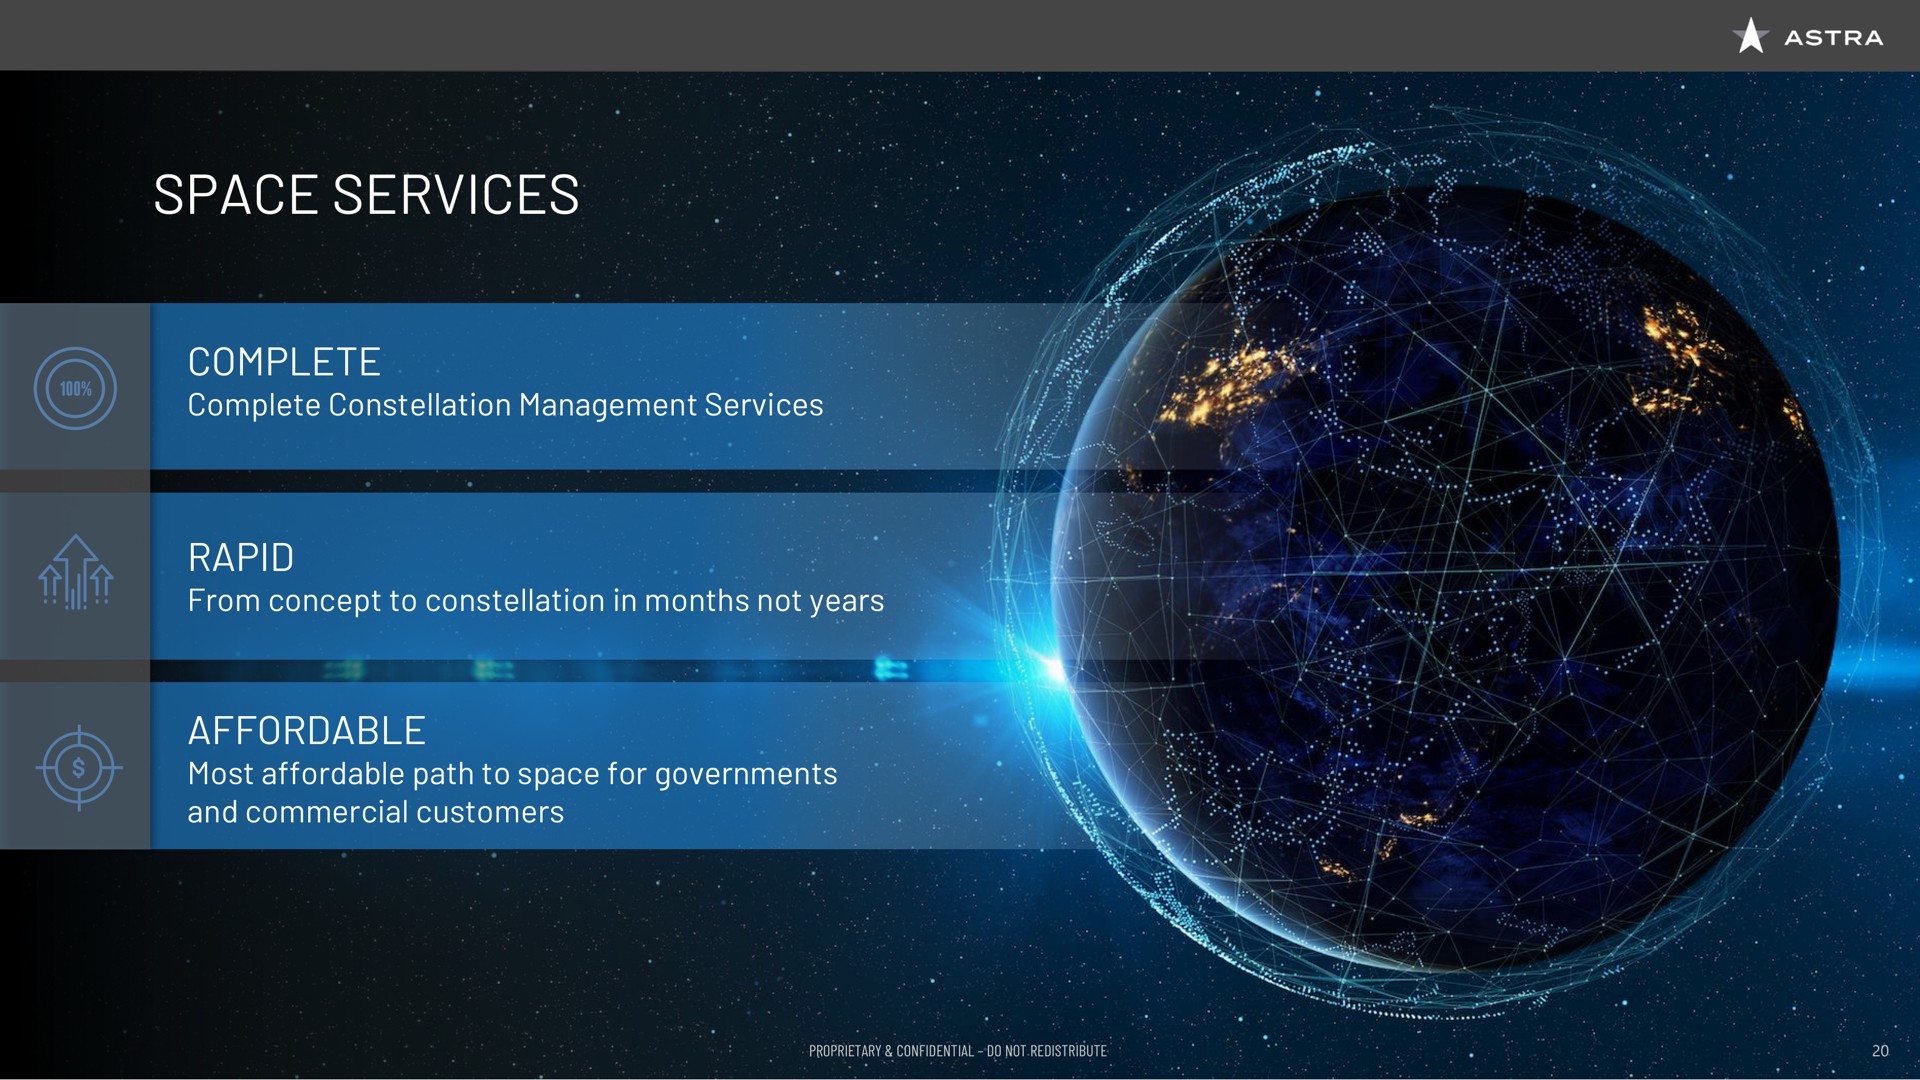 space services complete complete constellation management services rapid from concept to constellation in months not years affordable most affordable path to space for governments and commercial customers | Astra